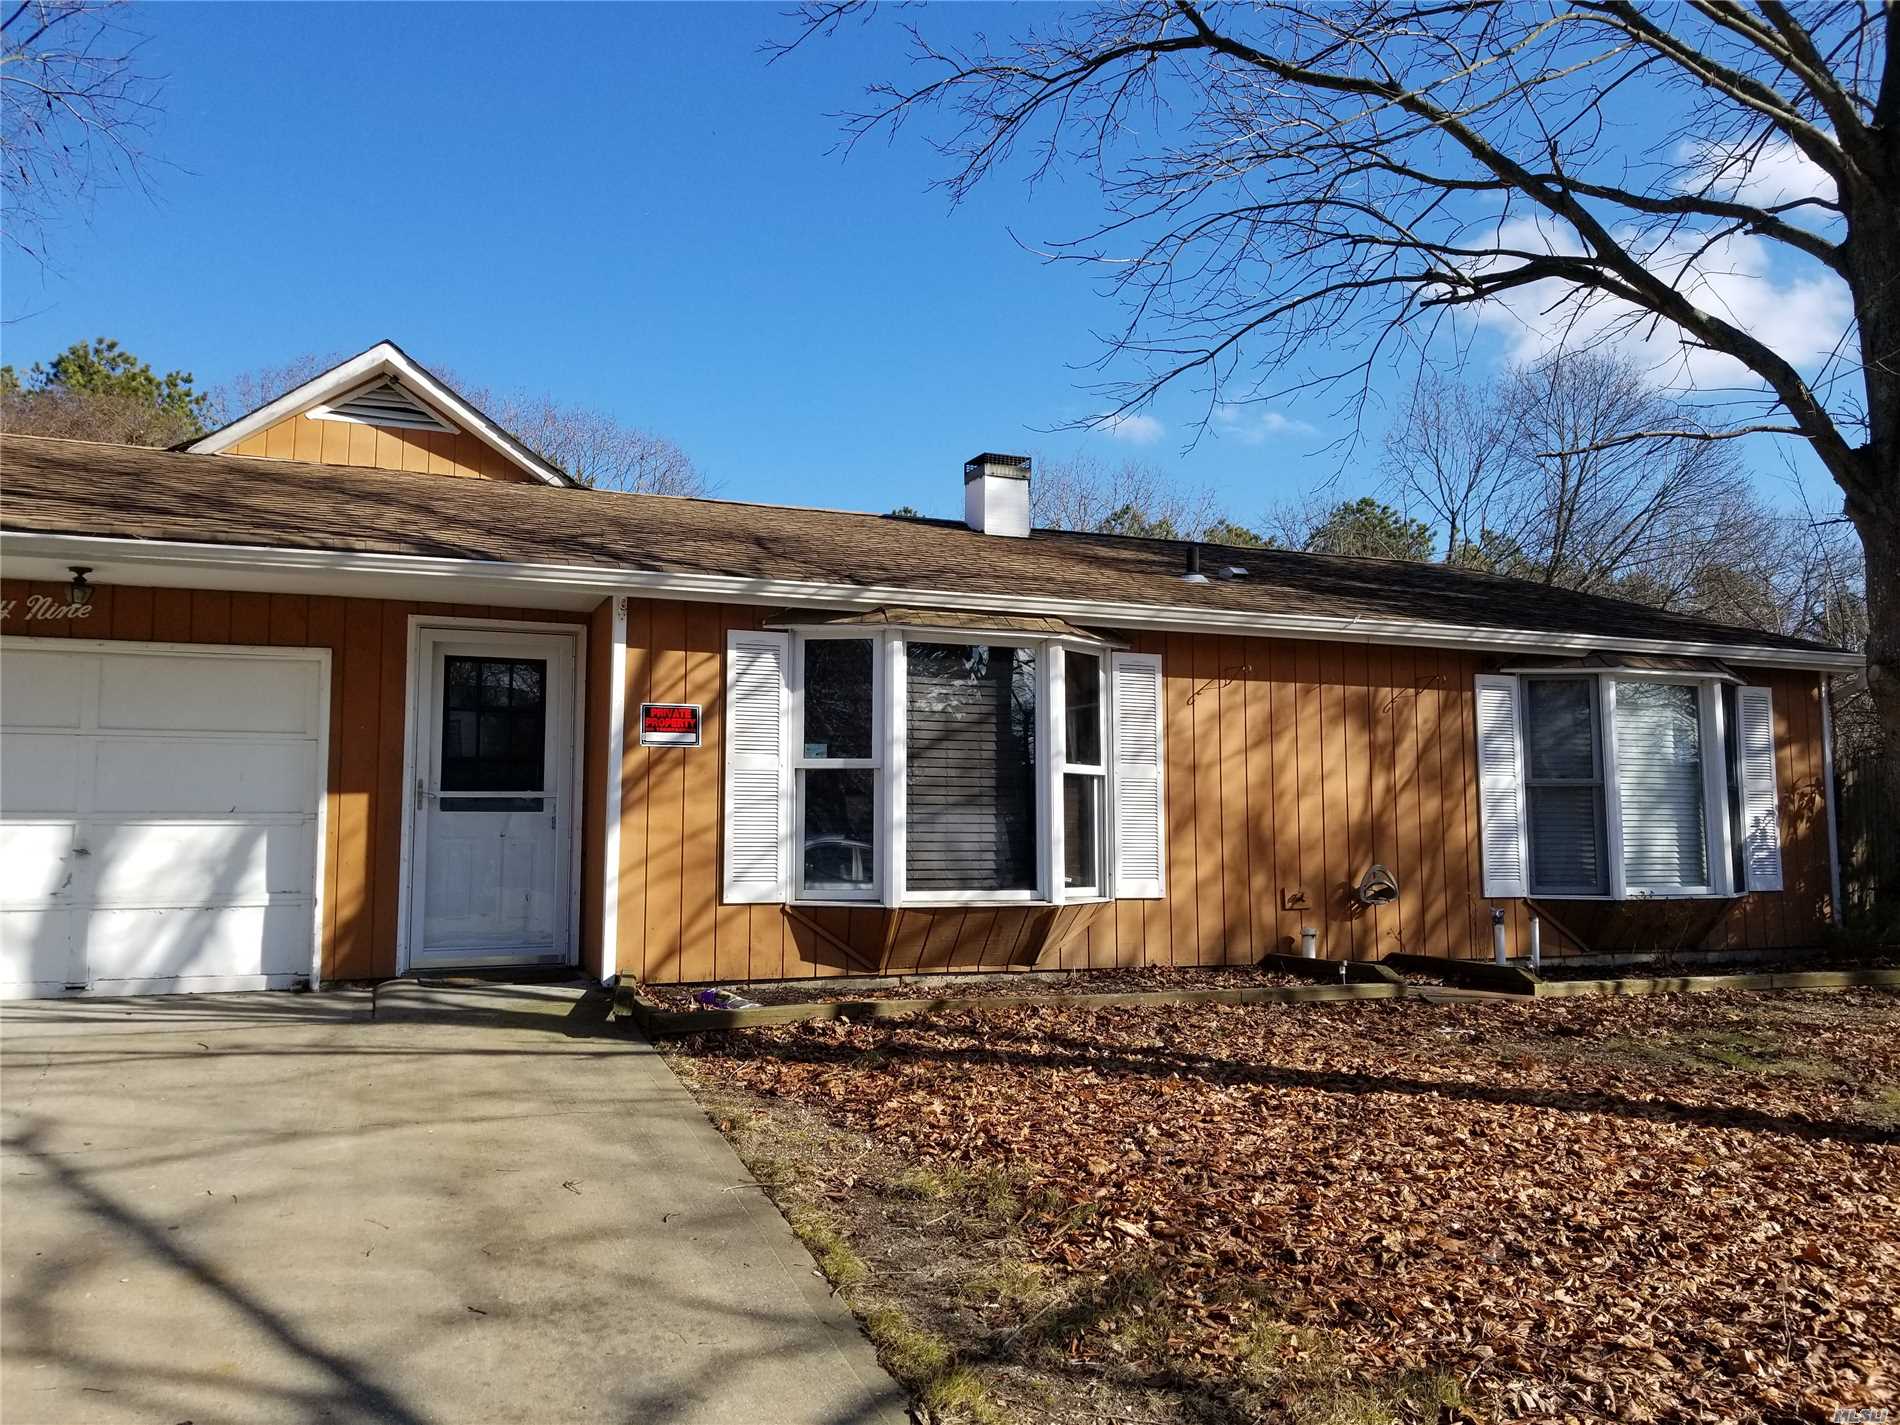 Great Opportunity For Cash Investors For Buy & Hold &/Or First Time Home Buyers With 203K Loan. Home Needs Tlc But Nice Layout For 4 Bed 2 Bath, 1 Car Garage Attached & Fenced In Yard. Sold As Is